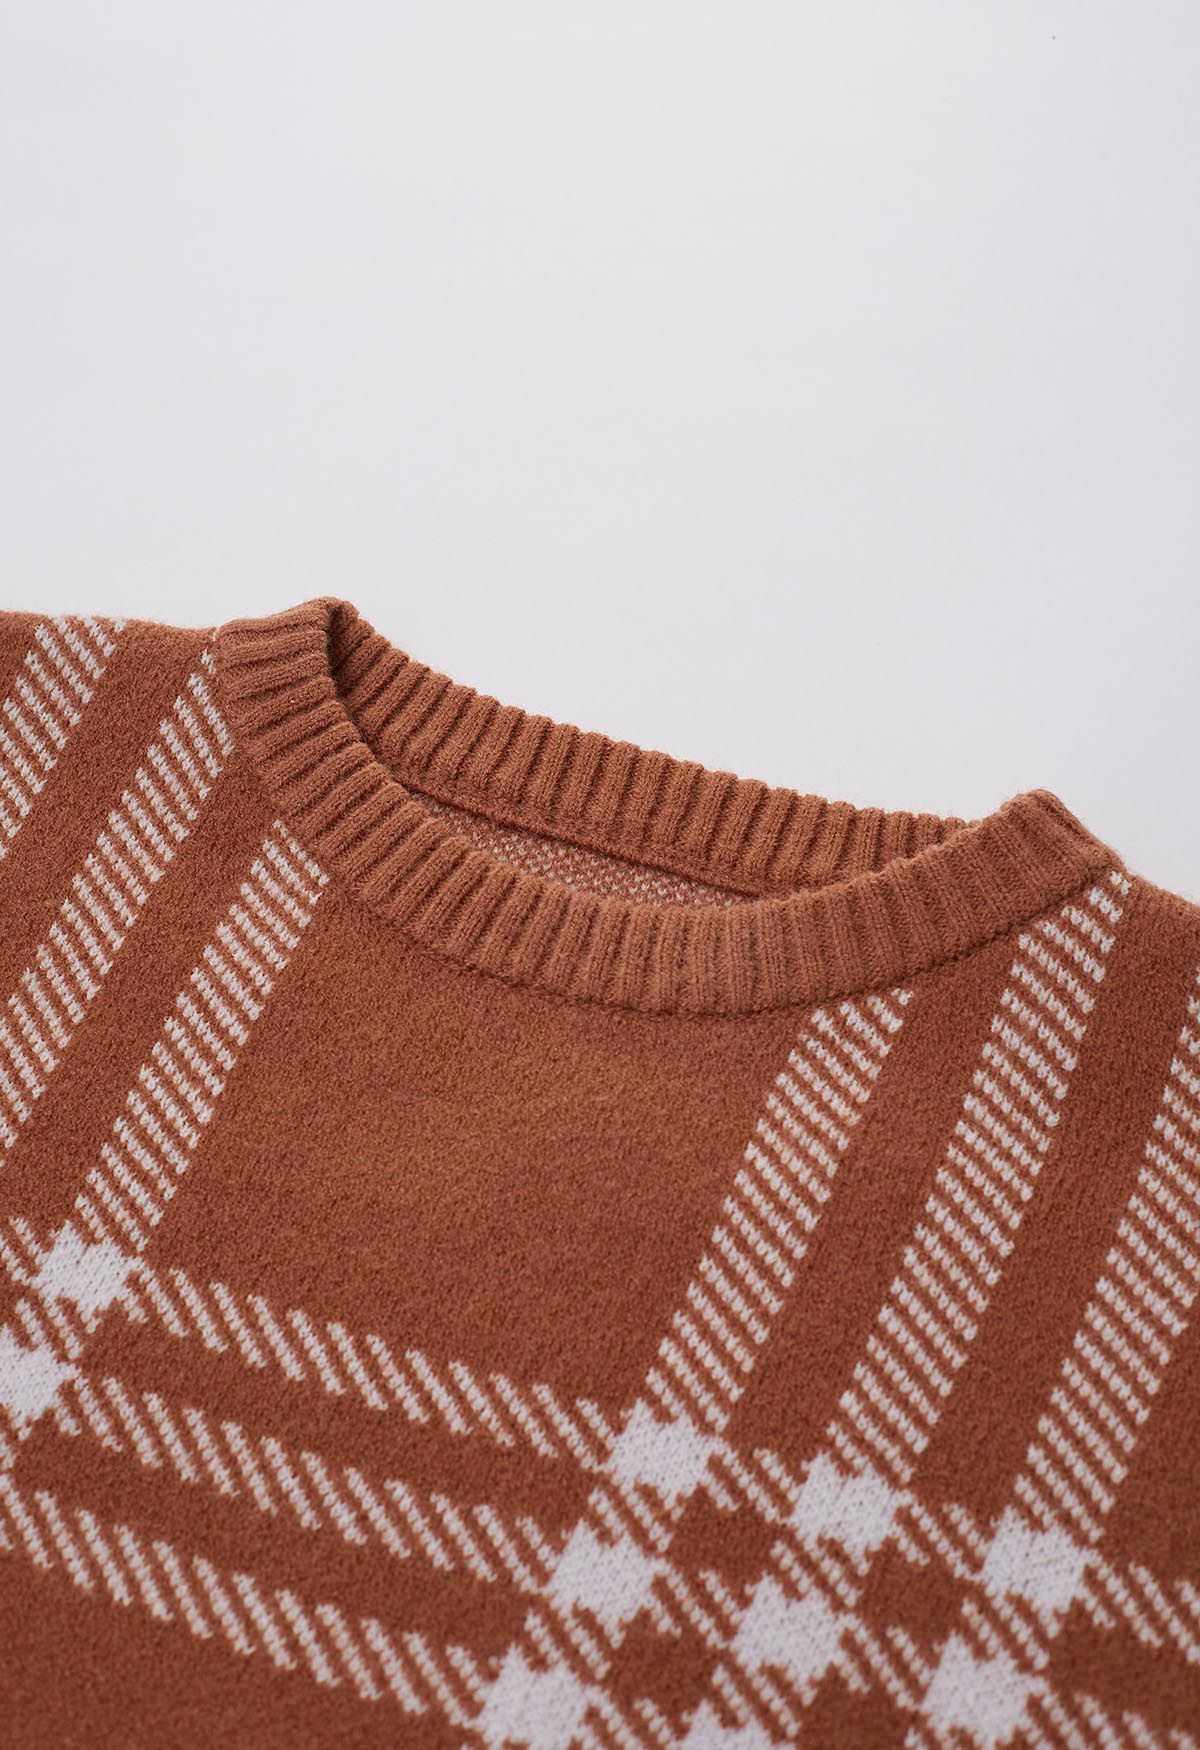 Classic Plaid Round Neck Knit Sweater in Caramel